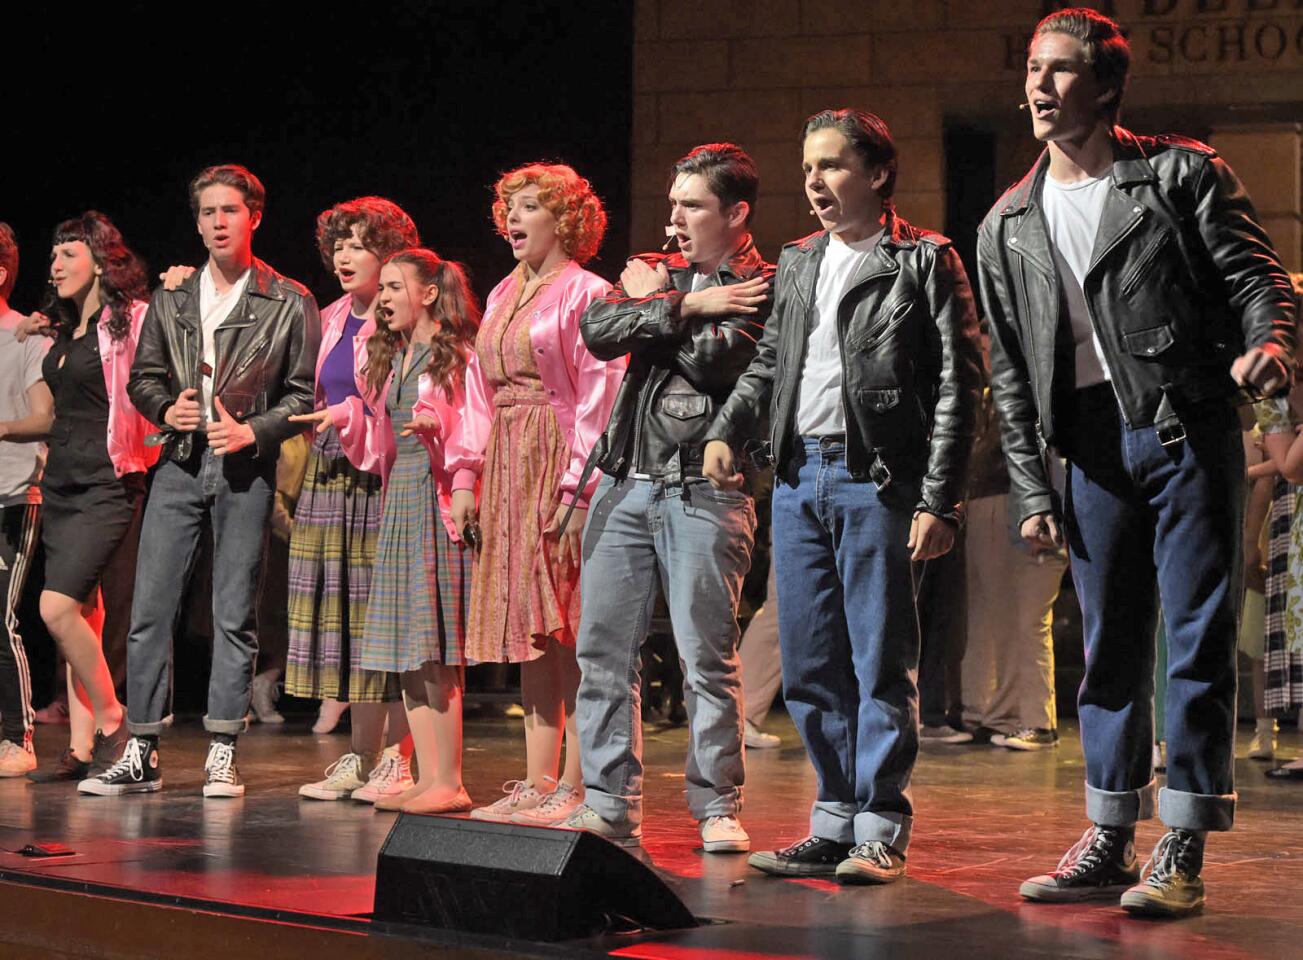 The "T-Birds" and the "Pink Ladies" sing "Summer Nights" during the rehearsal of "Grease" at John Burroughs High School on Tuesday.